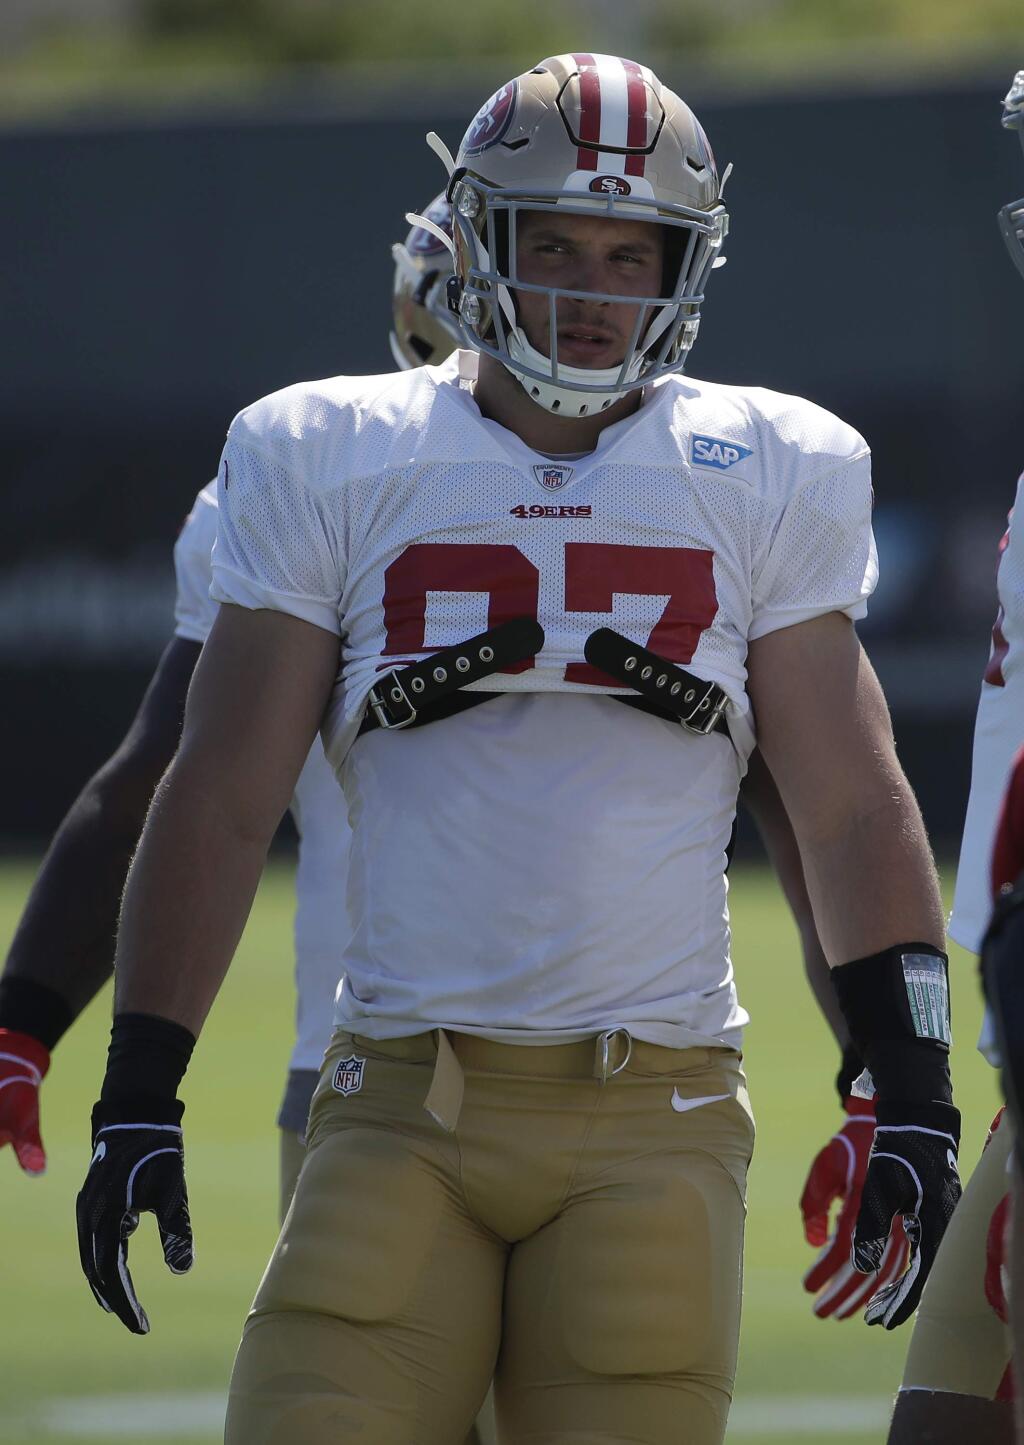 San Francisco 49ers' Nick Bosa stands on the field at the team's NFL football training camp in Santa Clara, Calif., Monday, July 29, 2019. (AP Photo/Jeff Chiu)